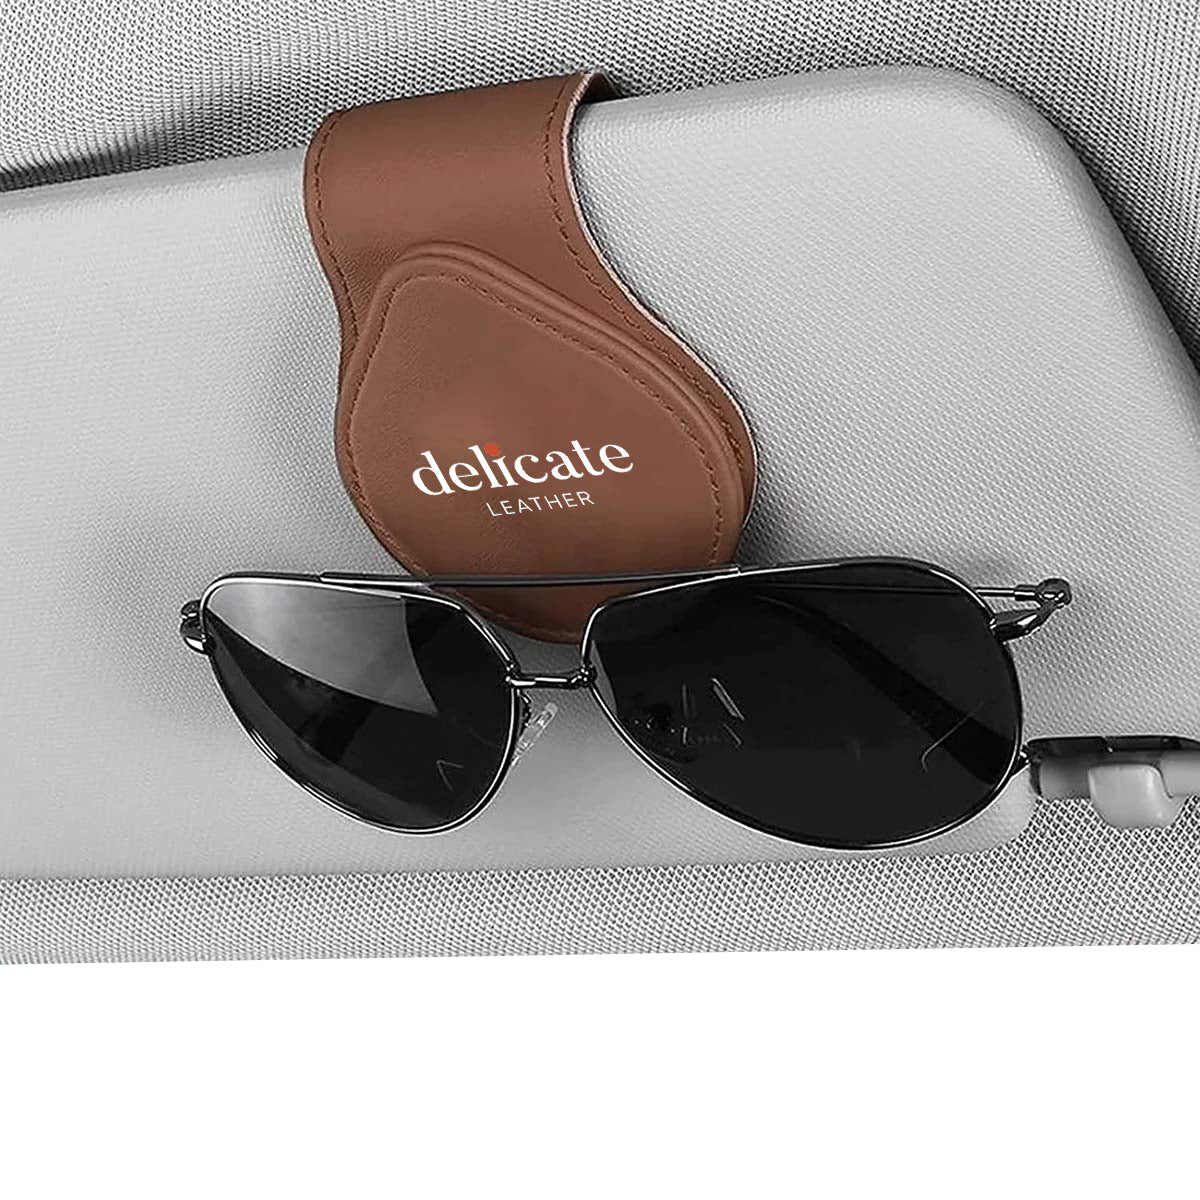 Car Sunglasses Holder, Custom For Your Cars, Magnetic Leather Glasses Frame 2023 Update MY13995 - Delicate Leather